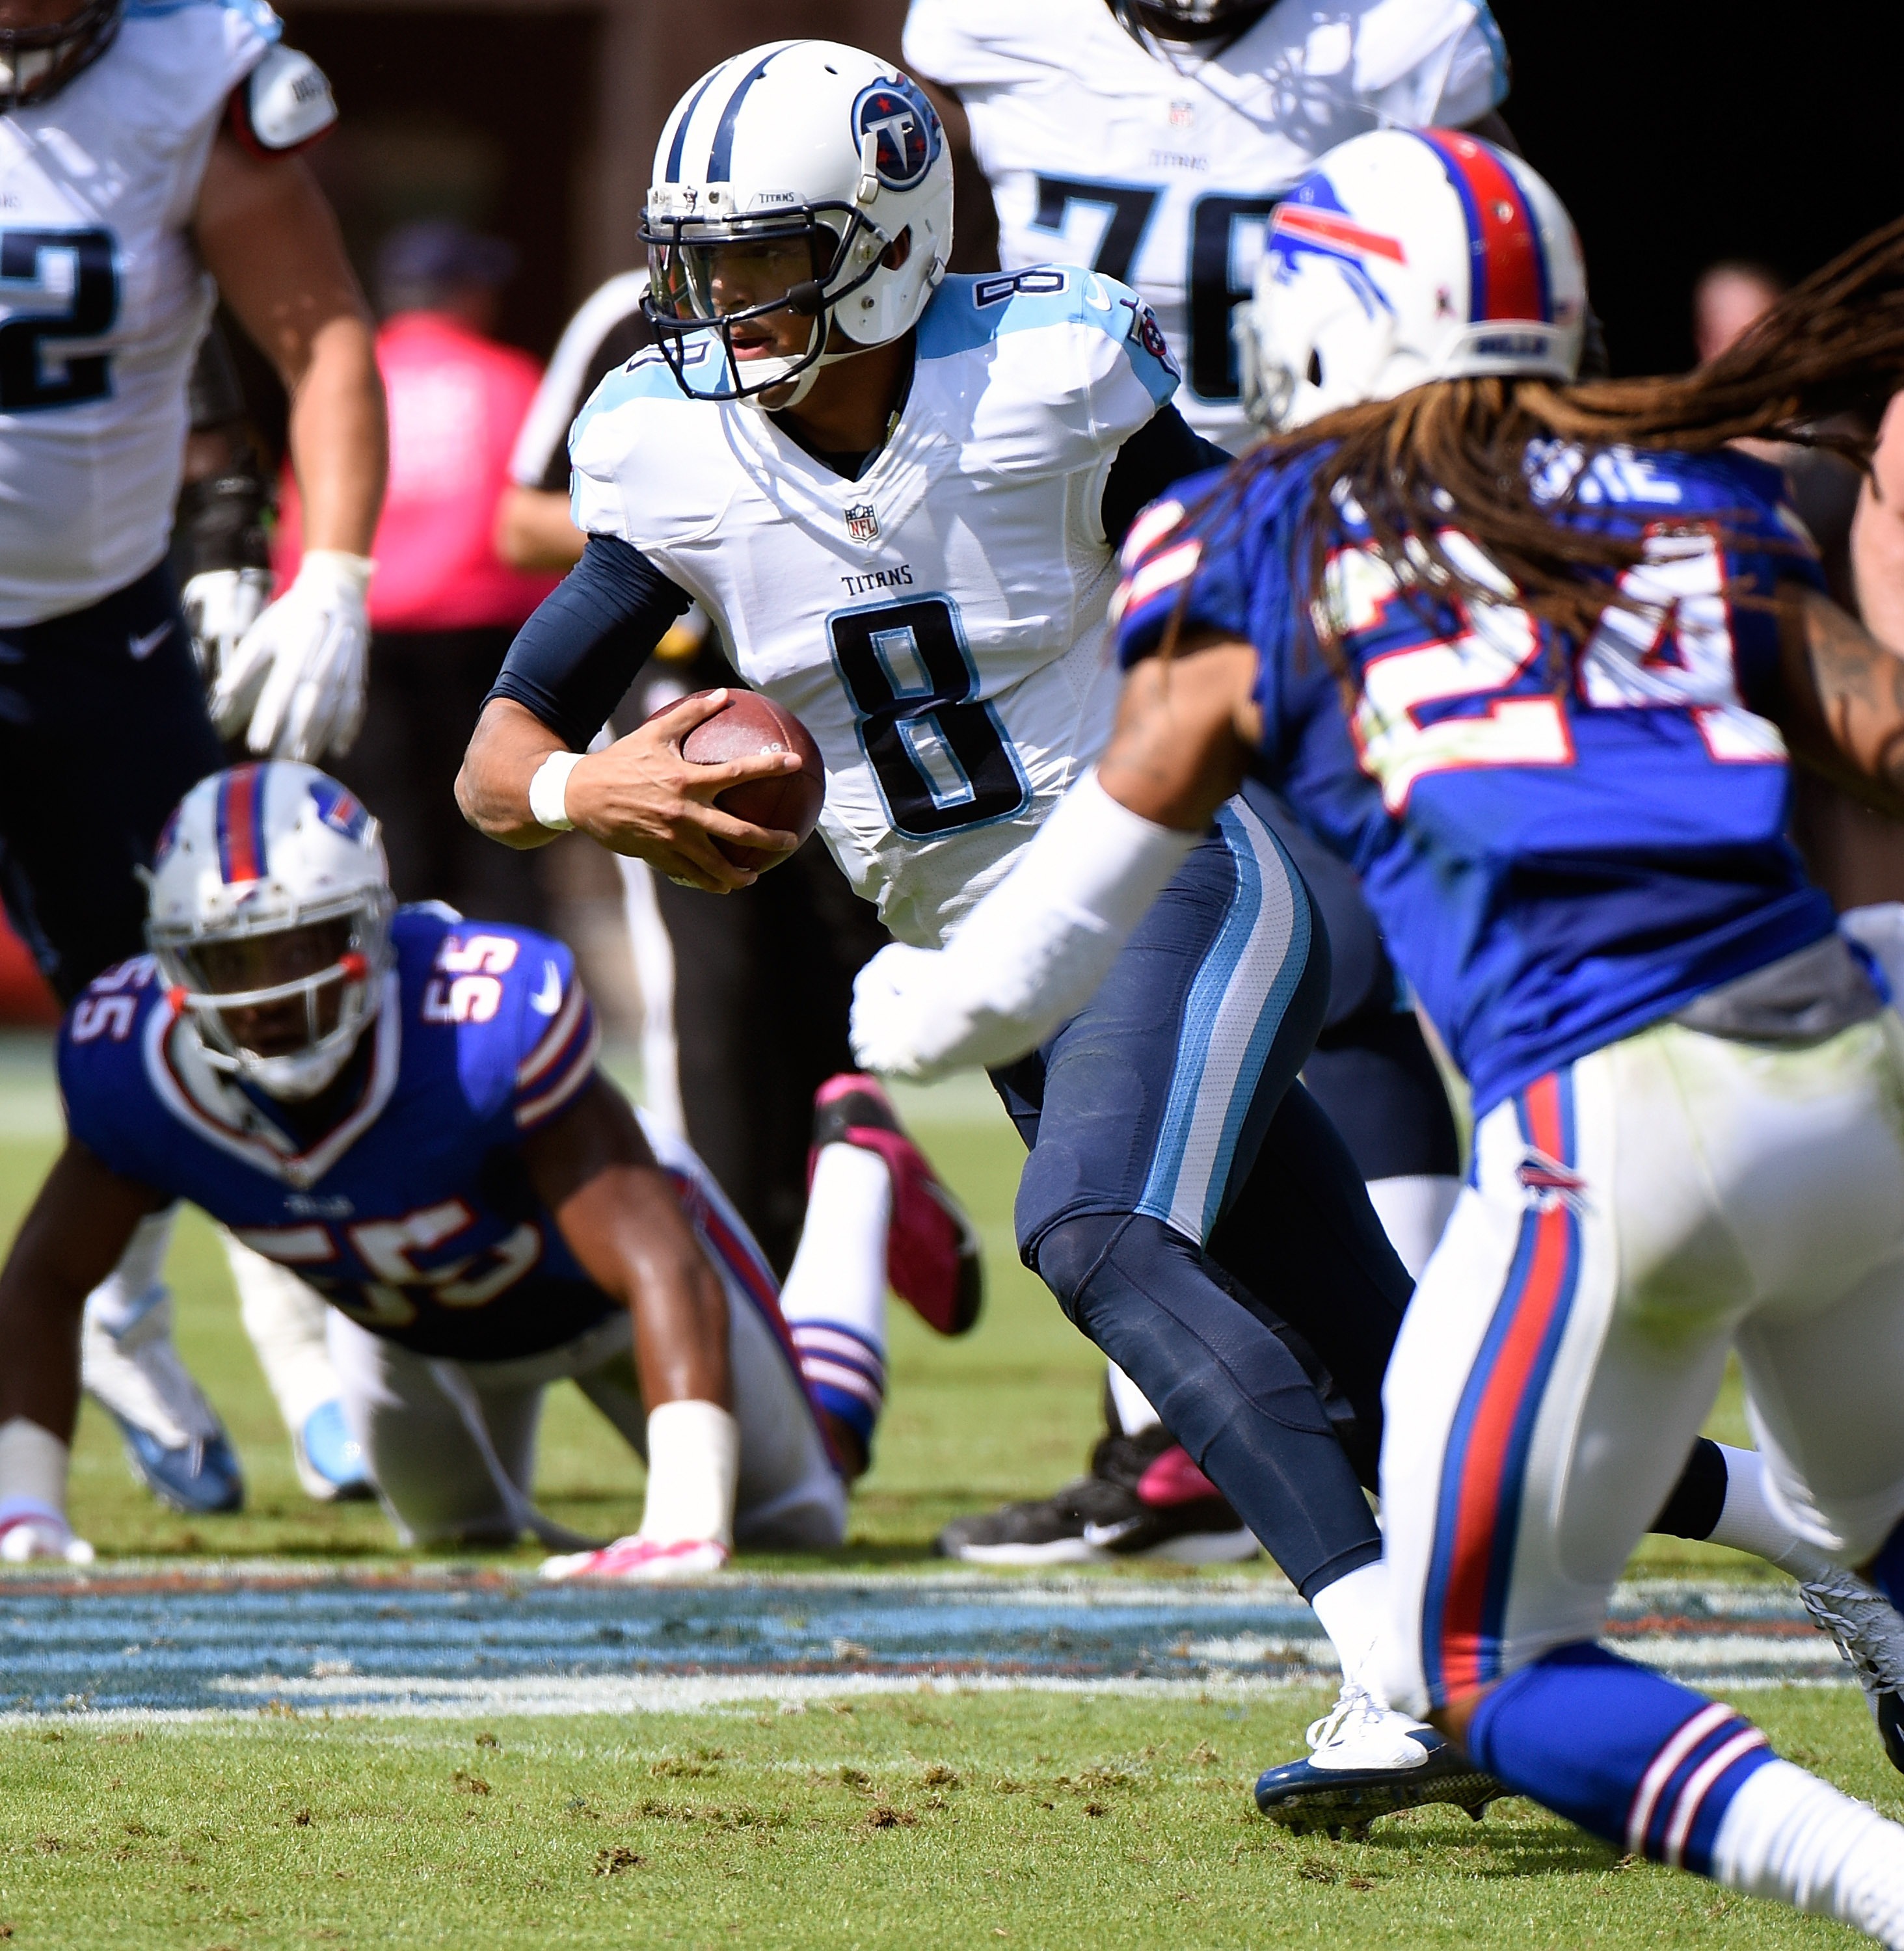 Marcus Mariota was good, but couldn't get a score when it mattered most. (Getty)